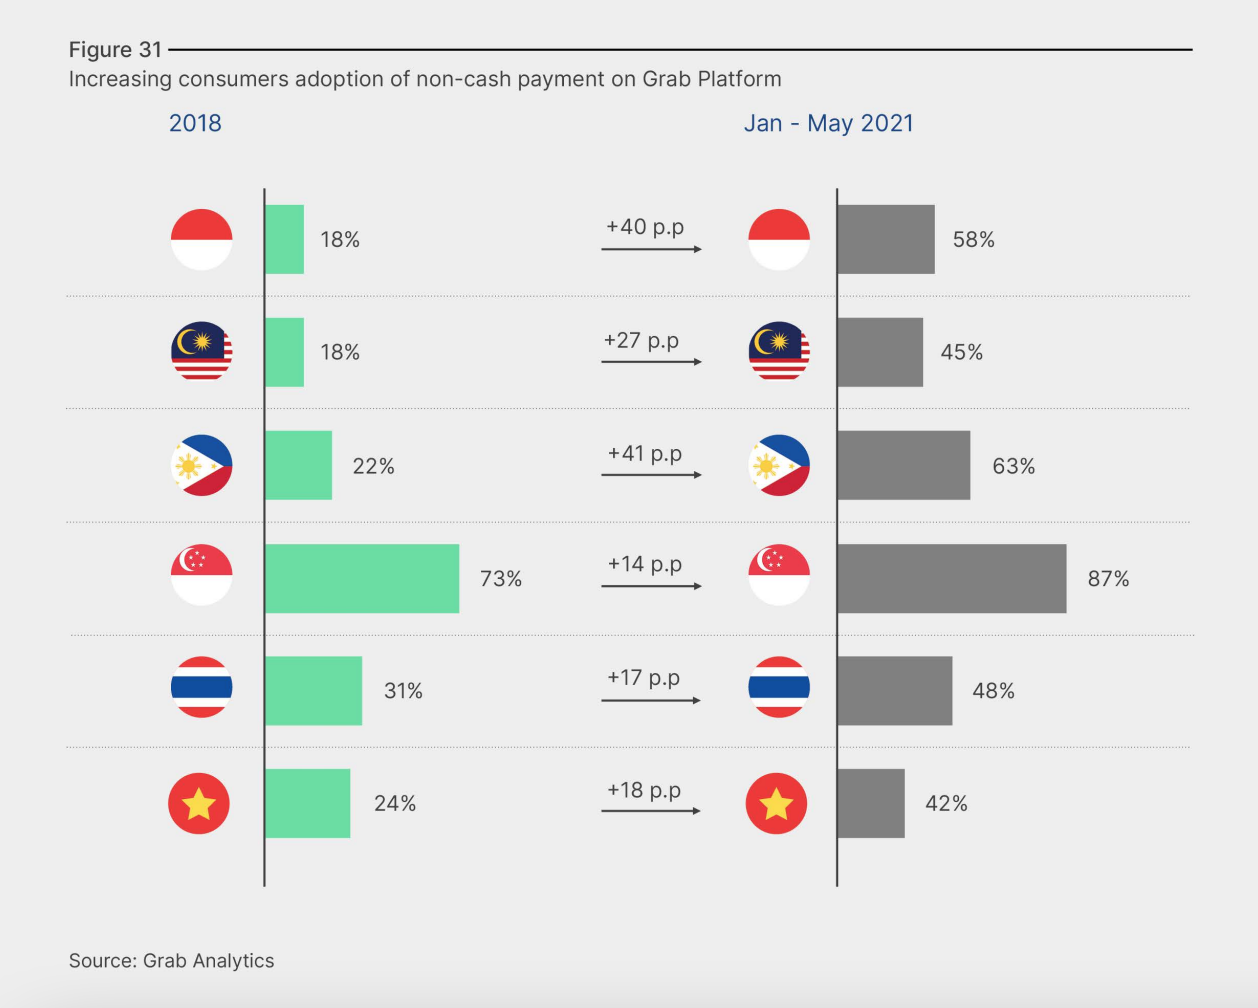 Increasing consumers adoption of non-cash payment on Grab platform, Source: Grab Analytics, via The Platform Economy: Southeast Asia's Digital Growth Catalyst, Oct 2021